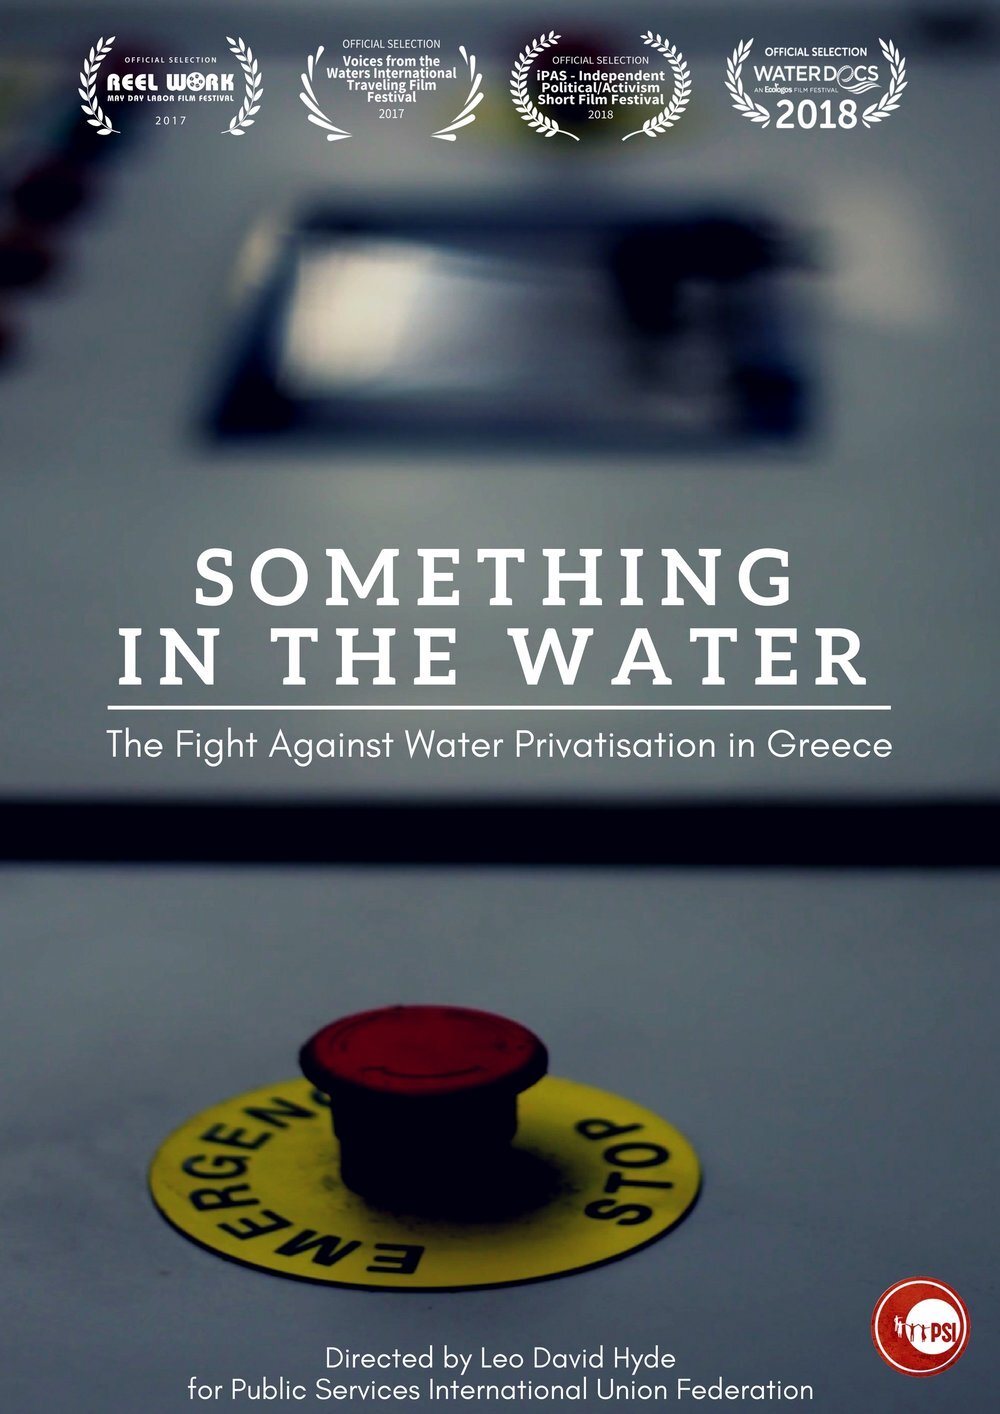 SOMETHING+IN+THE+WATER+Poster+with+WD+laurels.jpg